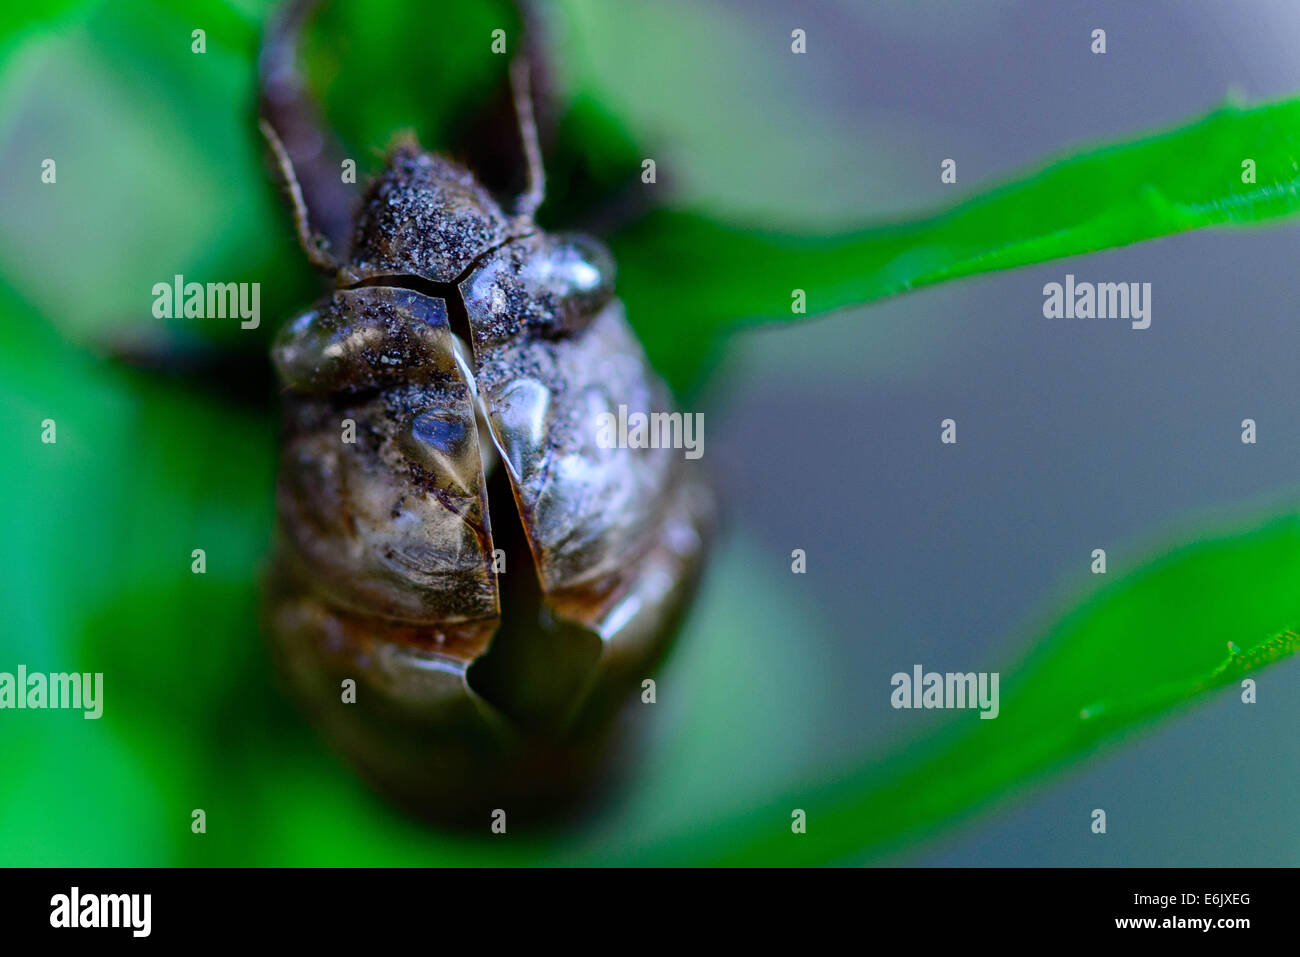 abandoned cicada shell clinging to a plant Stock Photo